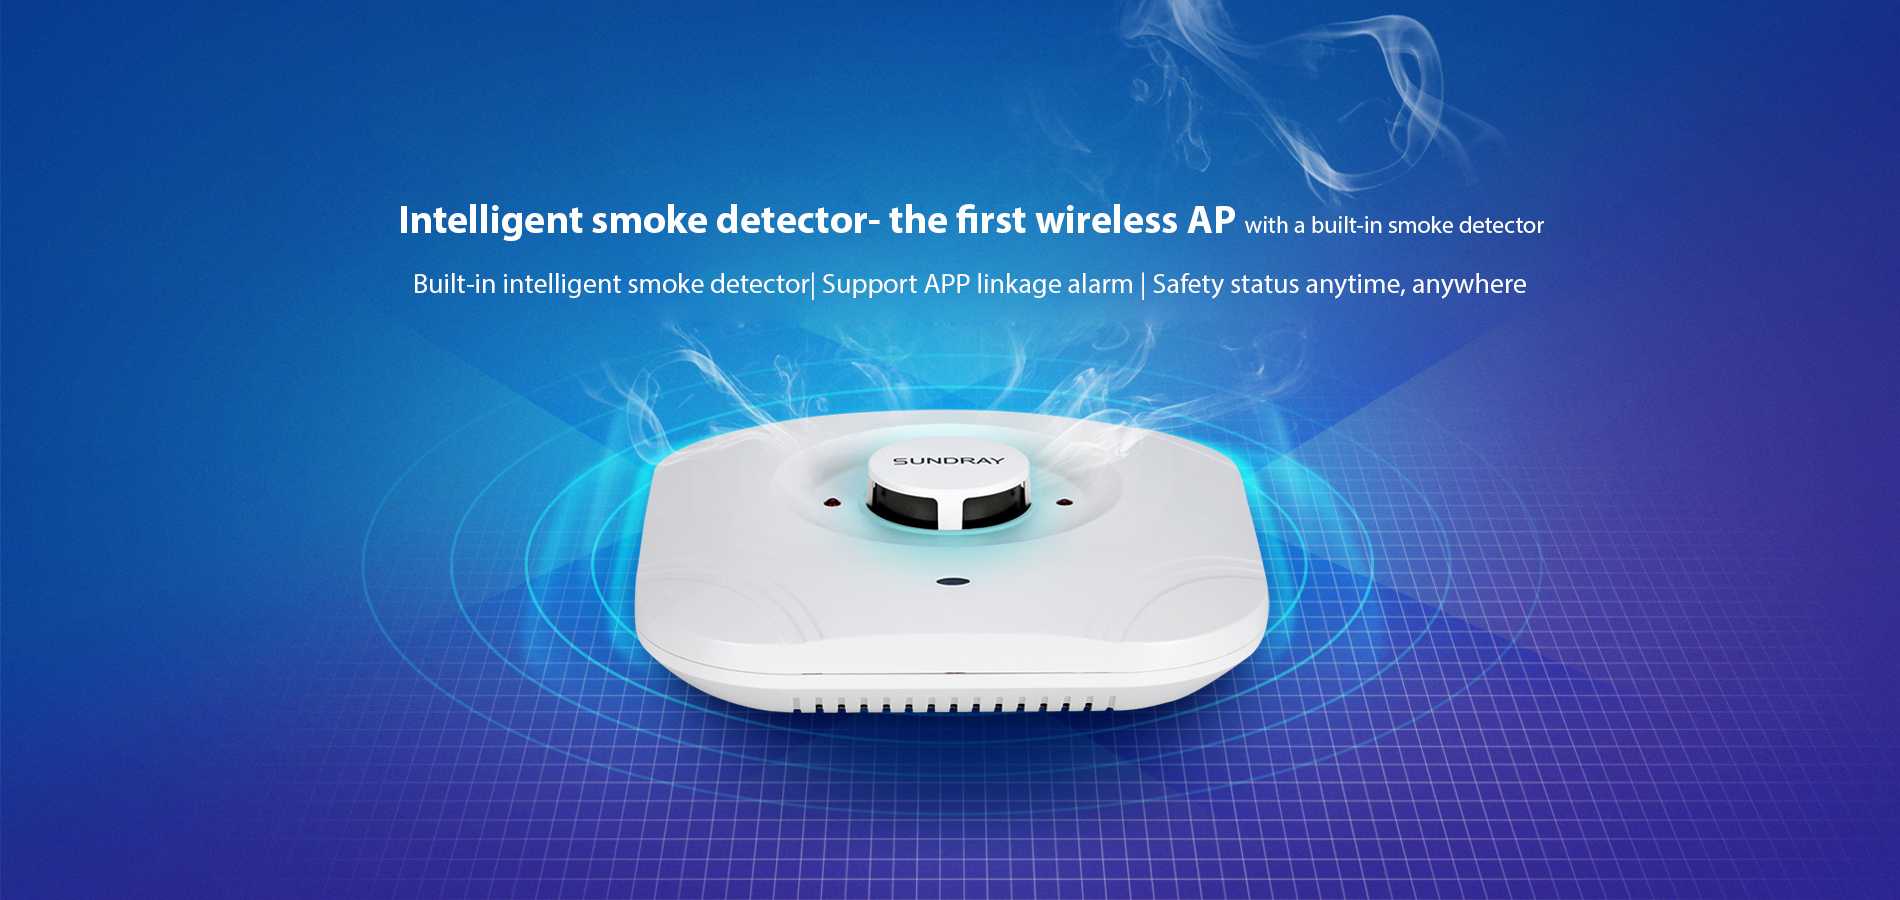 Intelligent Smoke Detector AP | The first wireless AP with a smoke detector | Sundray Technologies- Next-generation leading brand of wireless networks